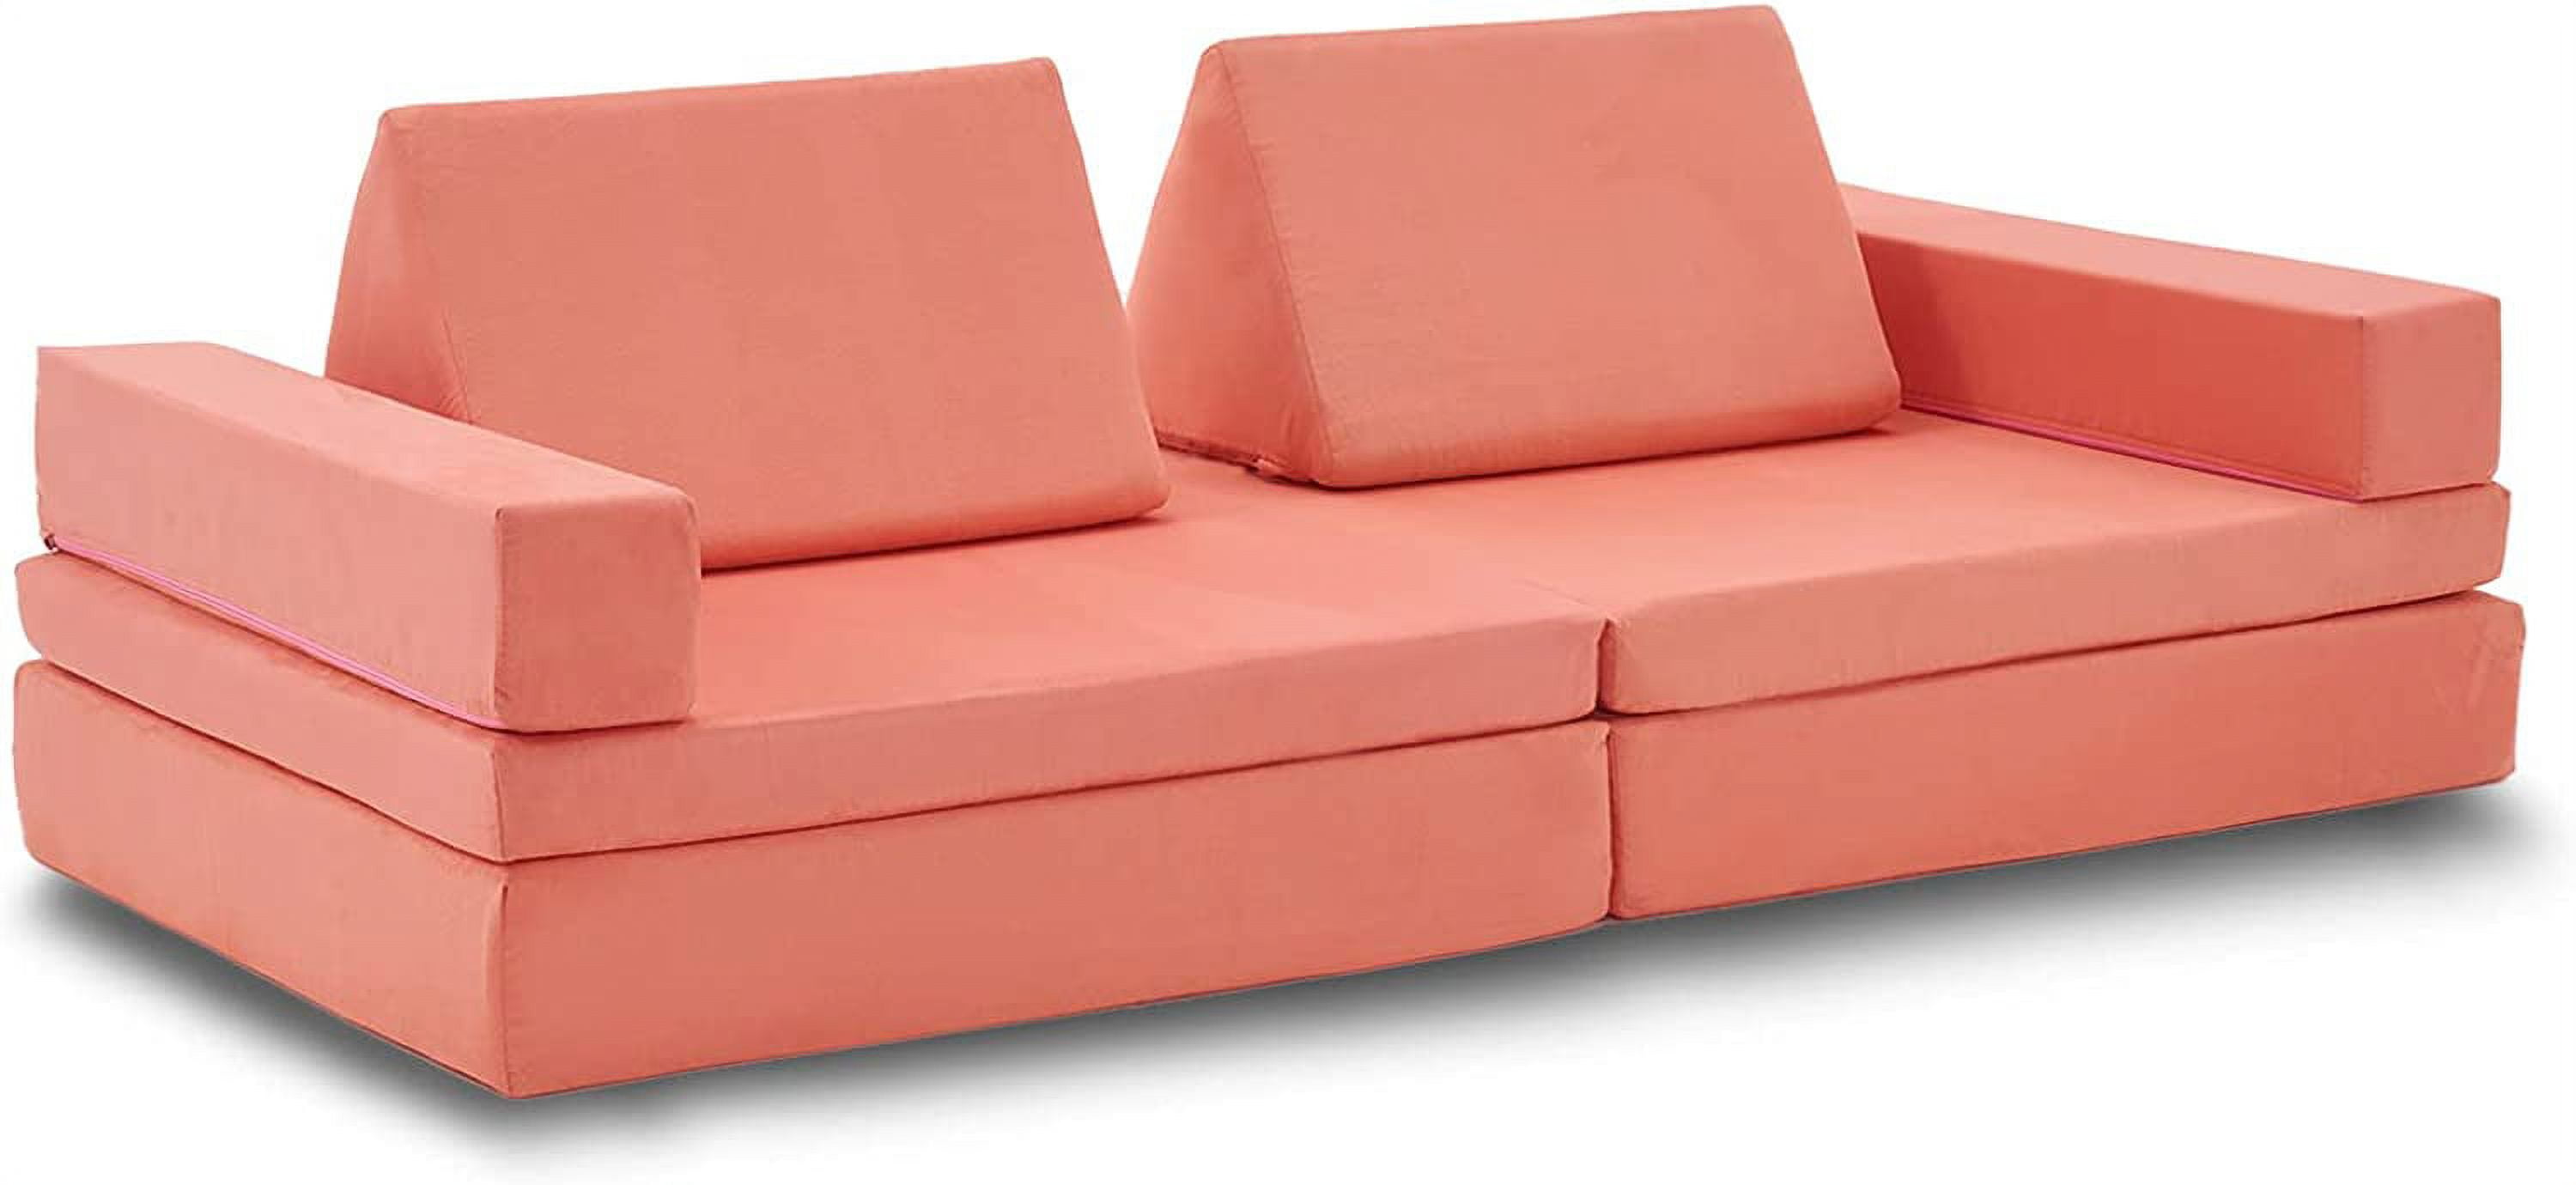  jela Kids Couch Large, Floor Sofa Modular Funiture for Kids  Adults, Playhouse Play Set for Toddlers Babies, Modular Foam Play Couch  Indoor Outdoor (56.7x28.3x17.3, Coral) : Clothing, Shoes & Jewelry